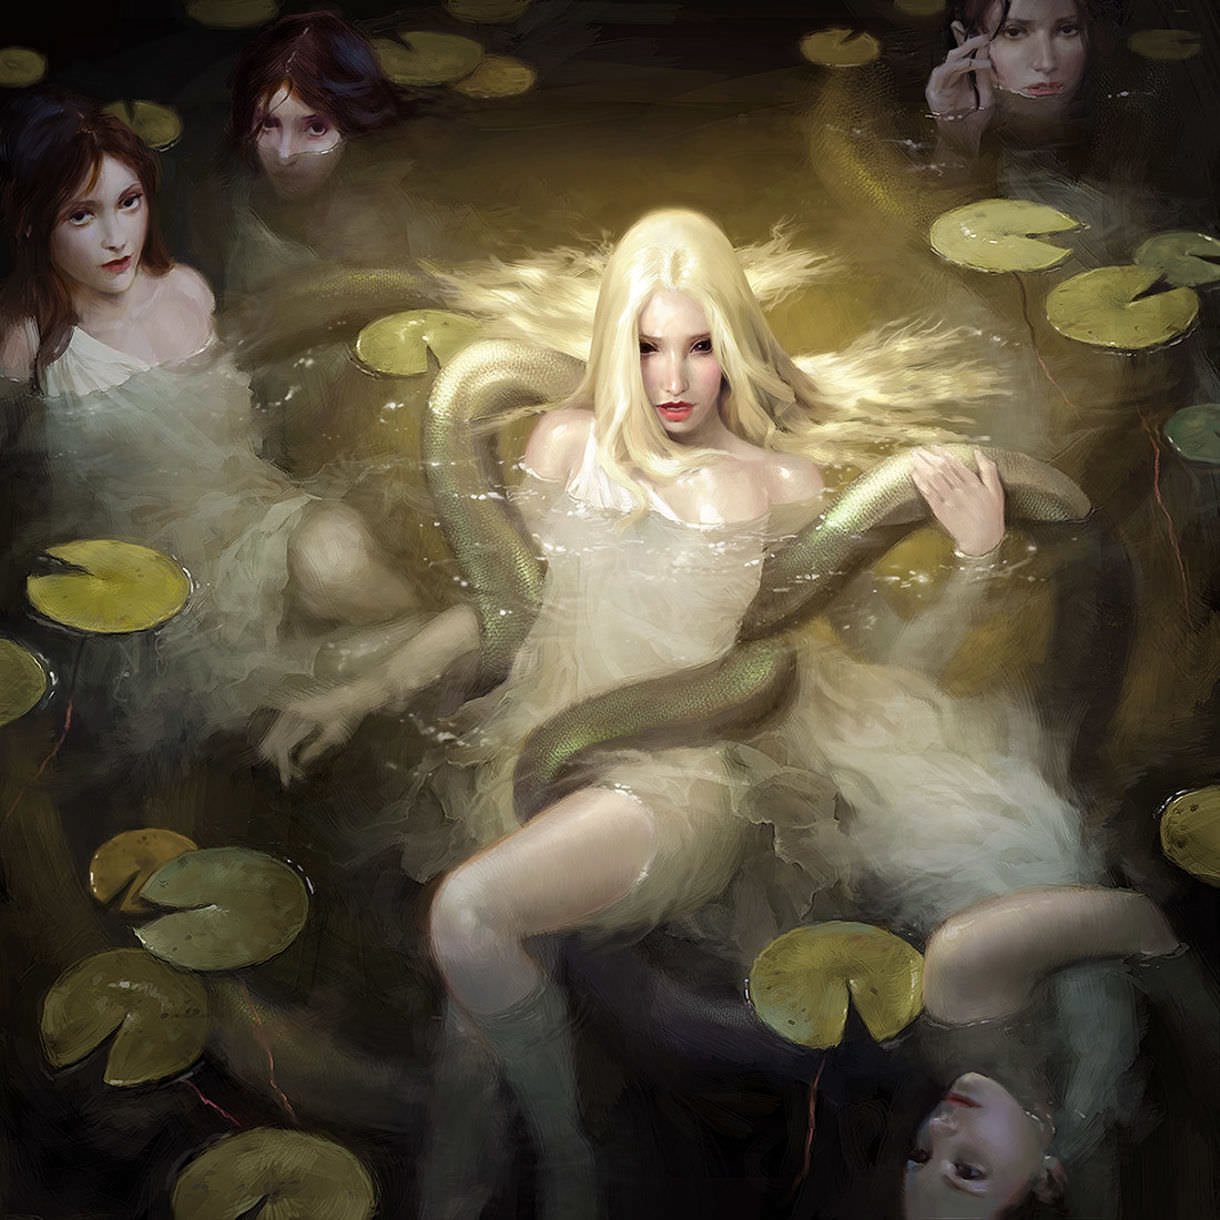 Five Naiads in a small pool by Clint Cearley